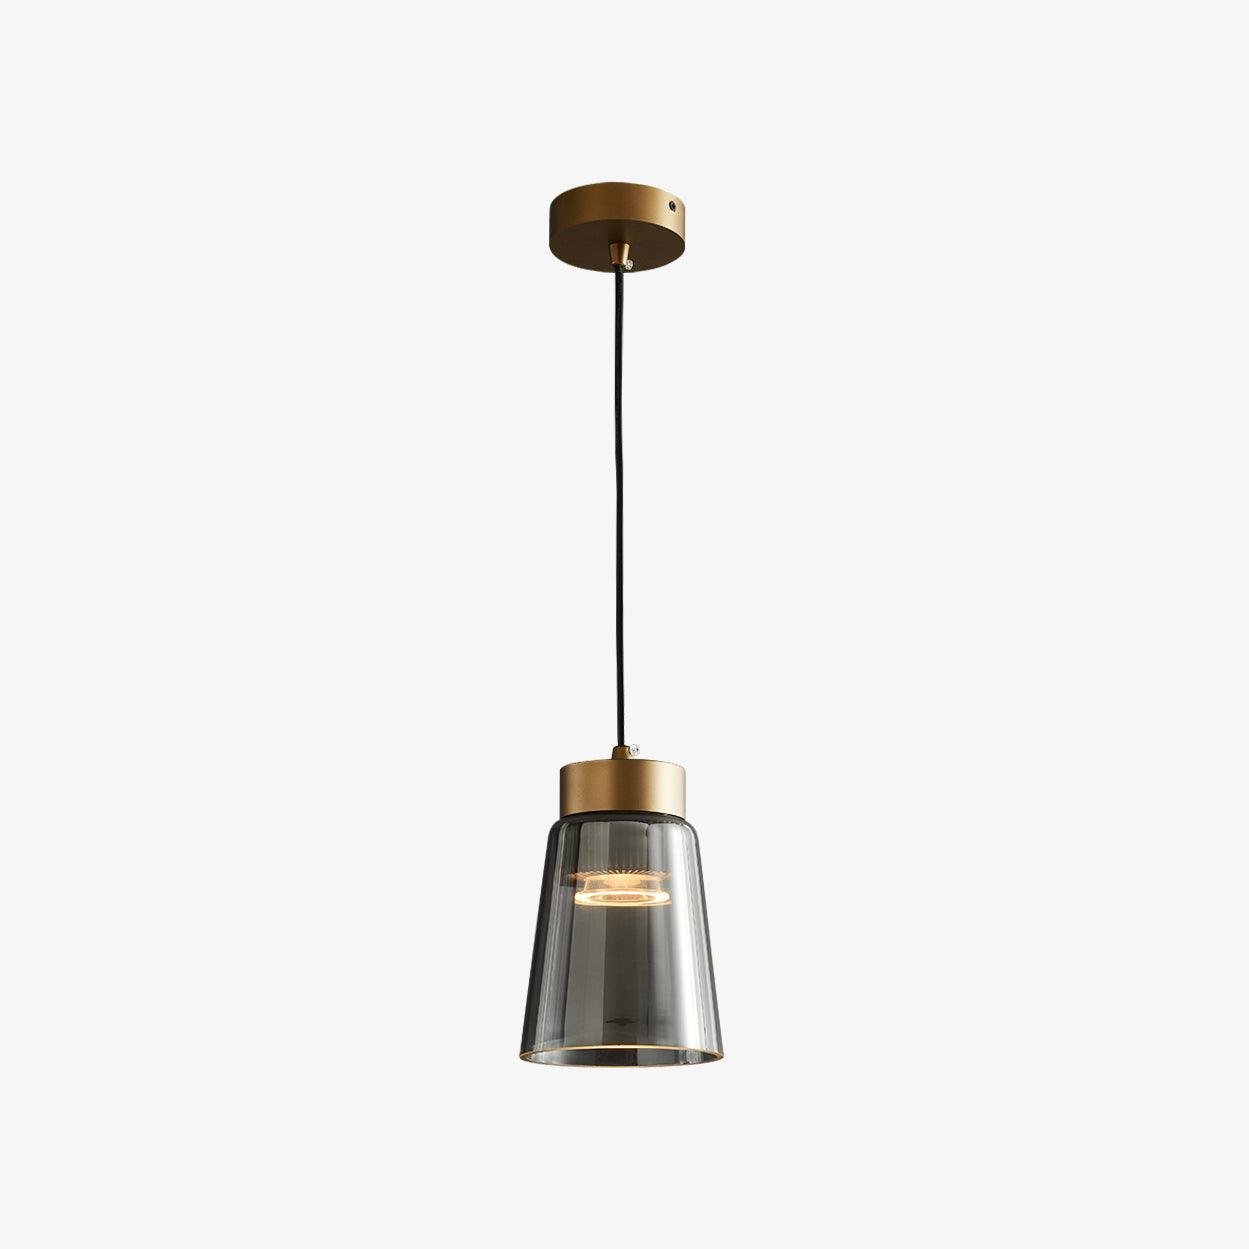 Gold and Smokey Gray Jerez2 Pendant Light, measuring 4.9" in diameter and 6.7" in height (12.5cm x 17cm), with a sleek and cool light.